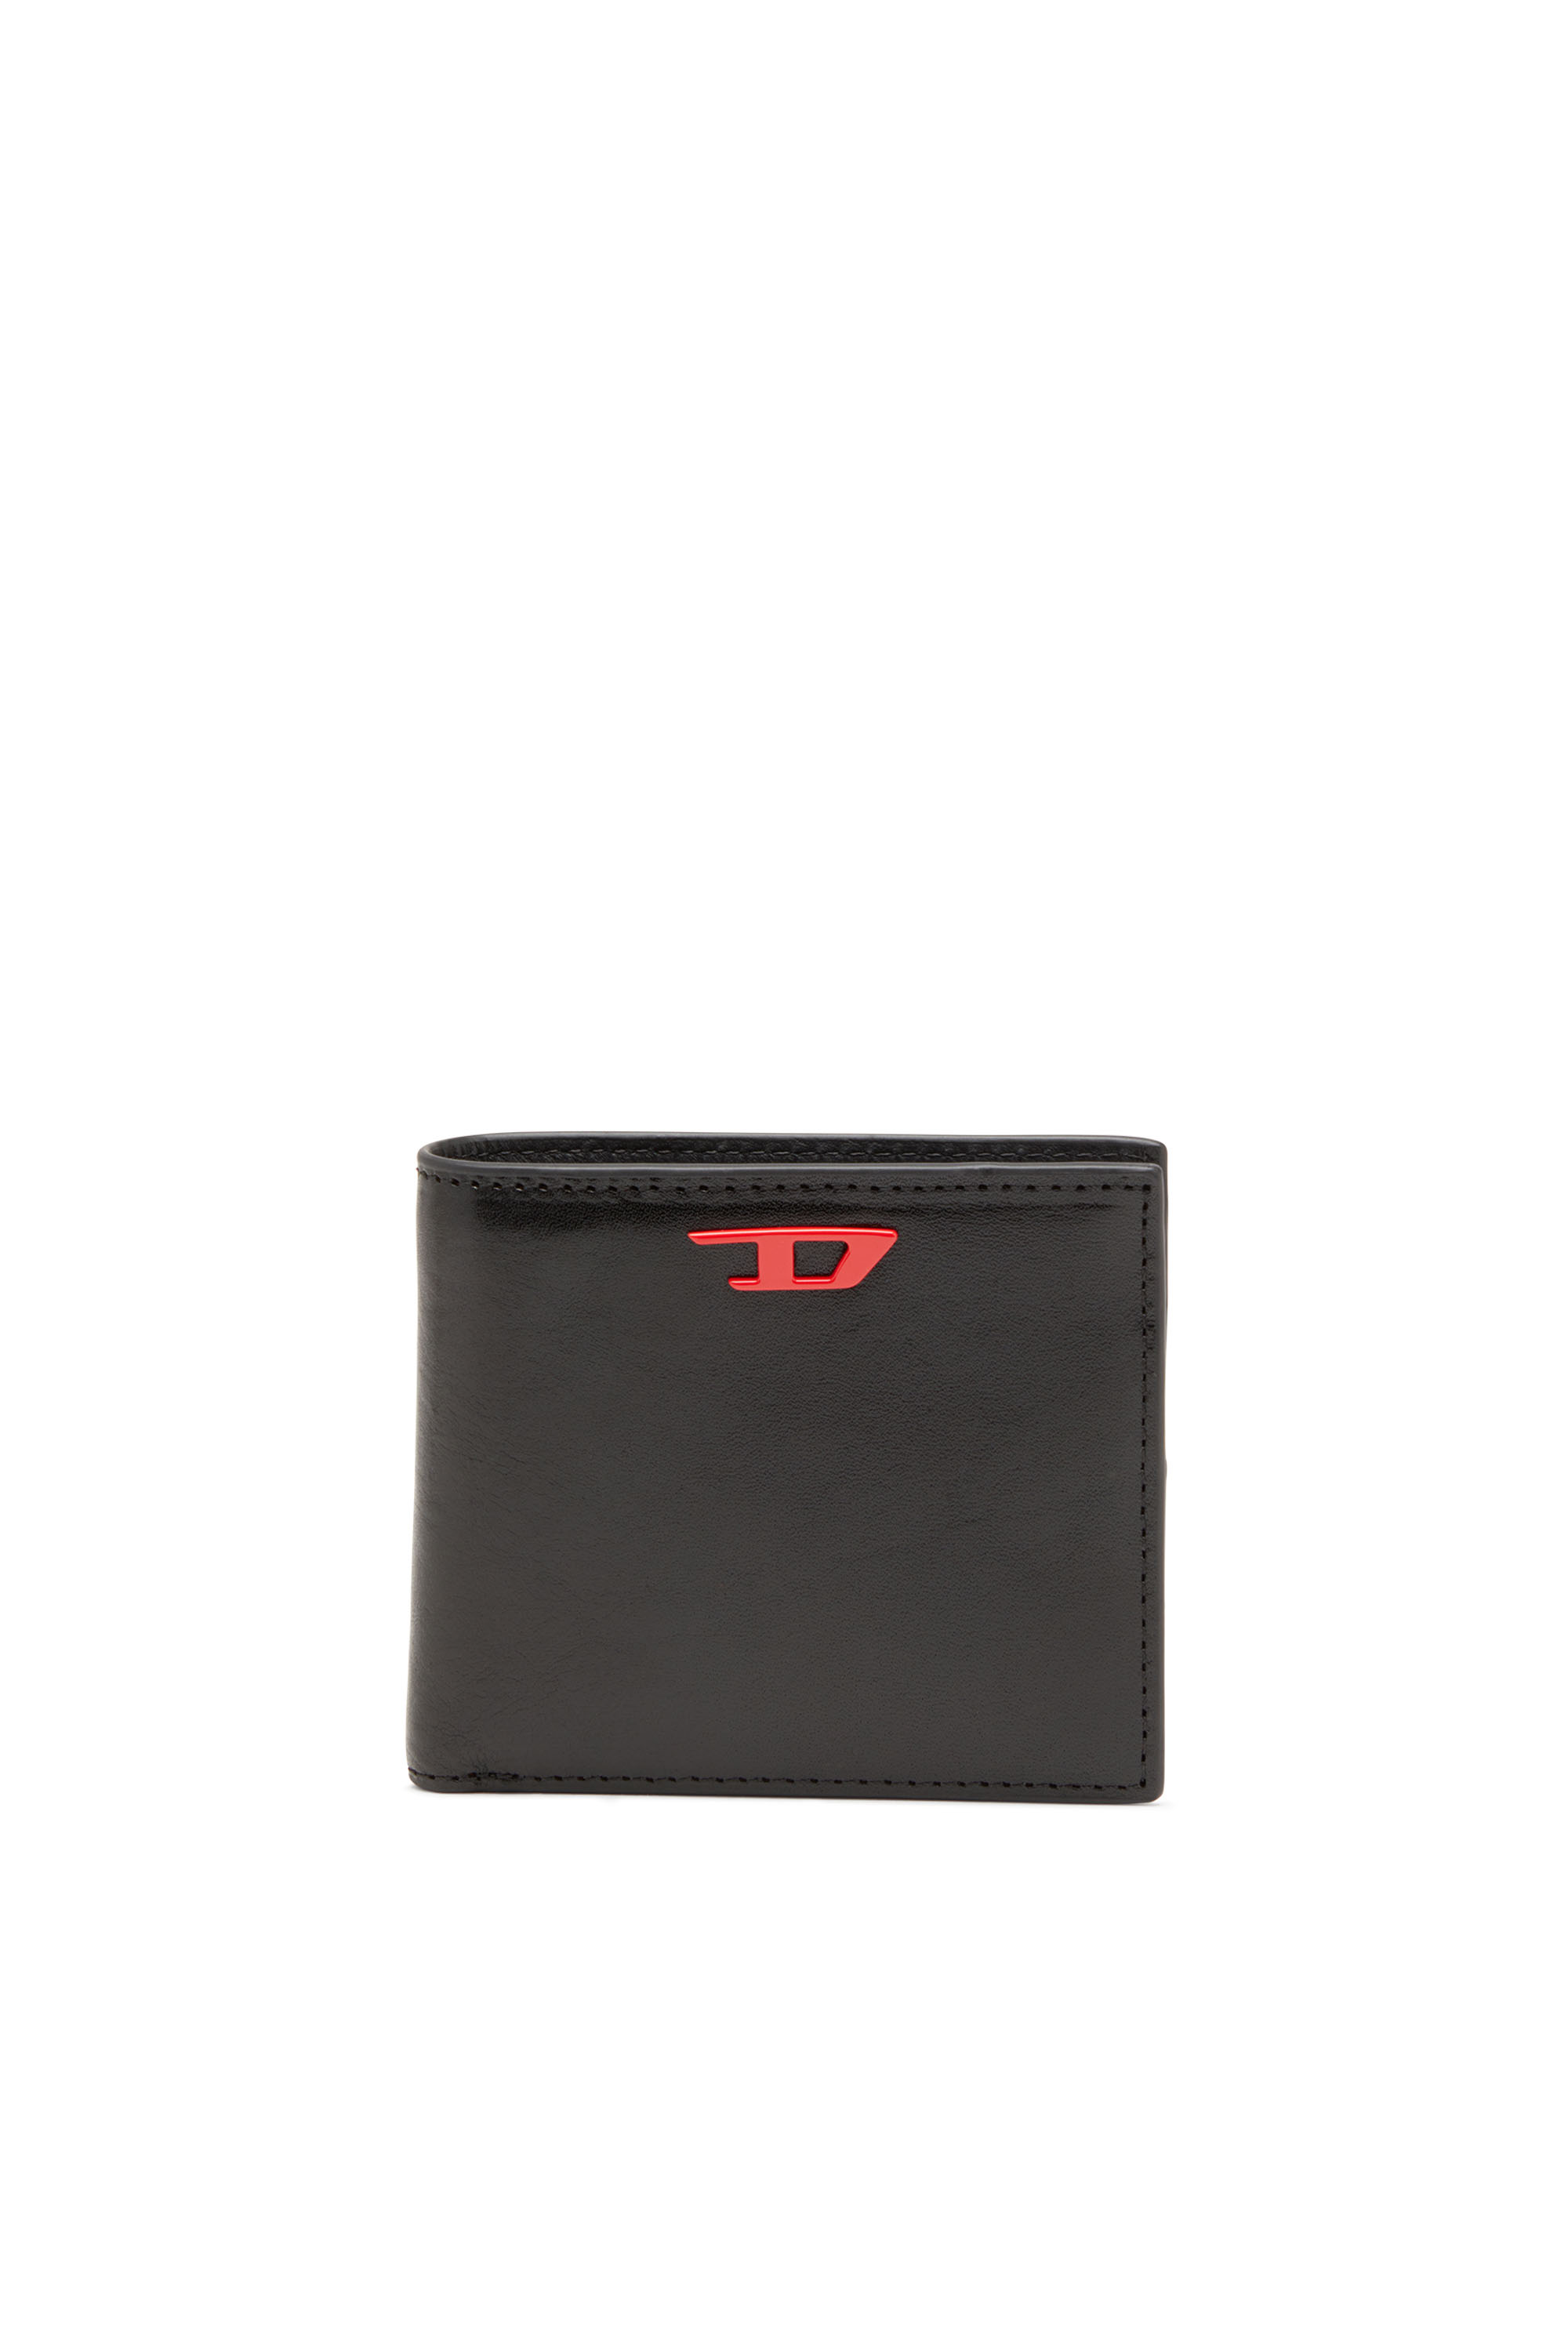 Diesel - Leather bi-fold wallet with red D plaque - Small Wallets - Man - Black